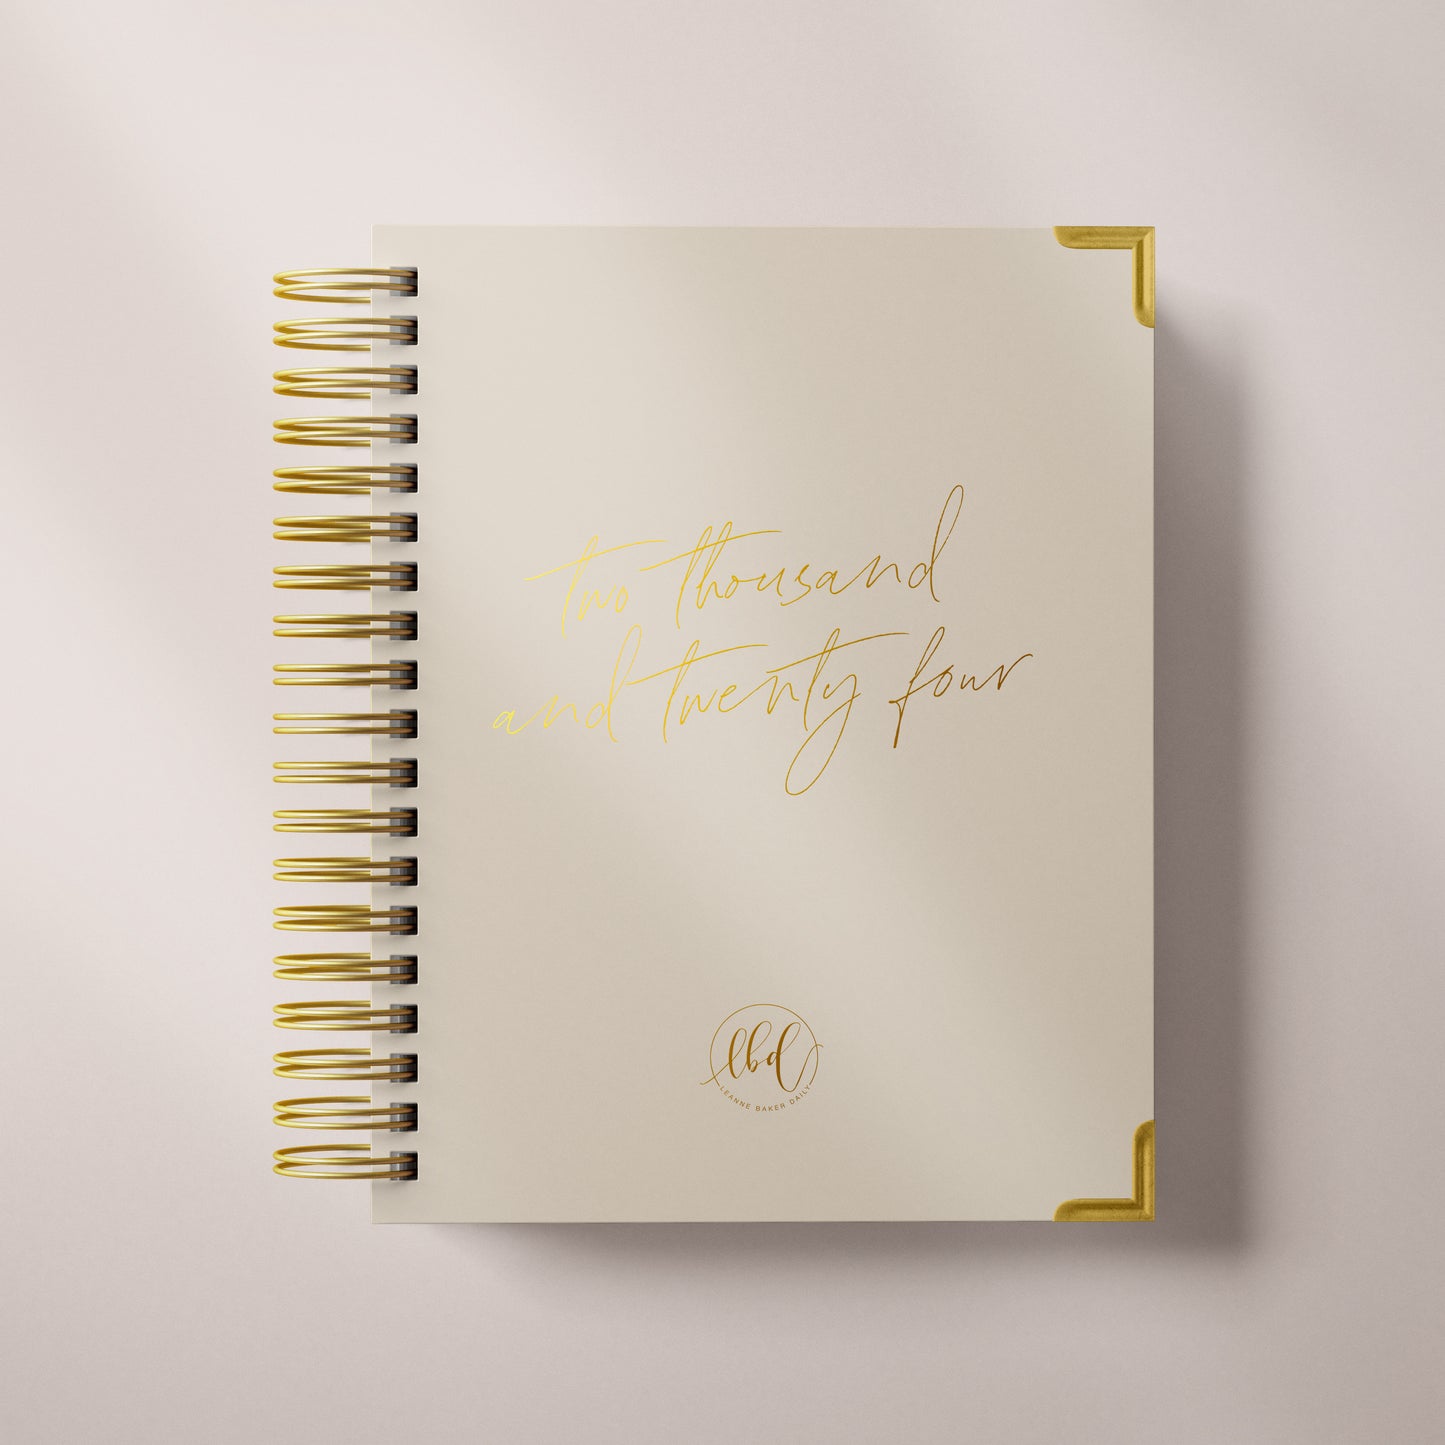 2024 DAILY LAYOUT Signature Planner